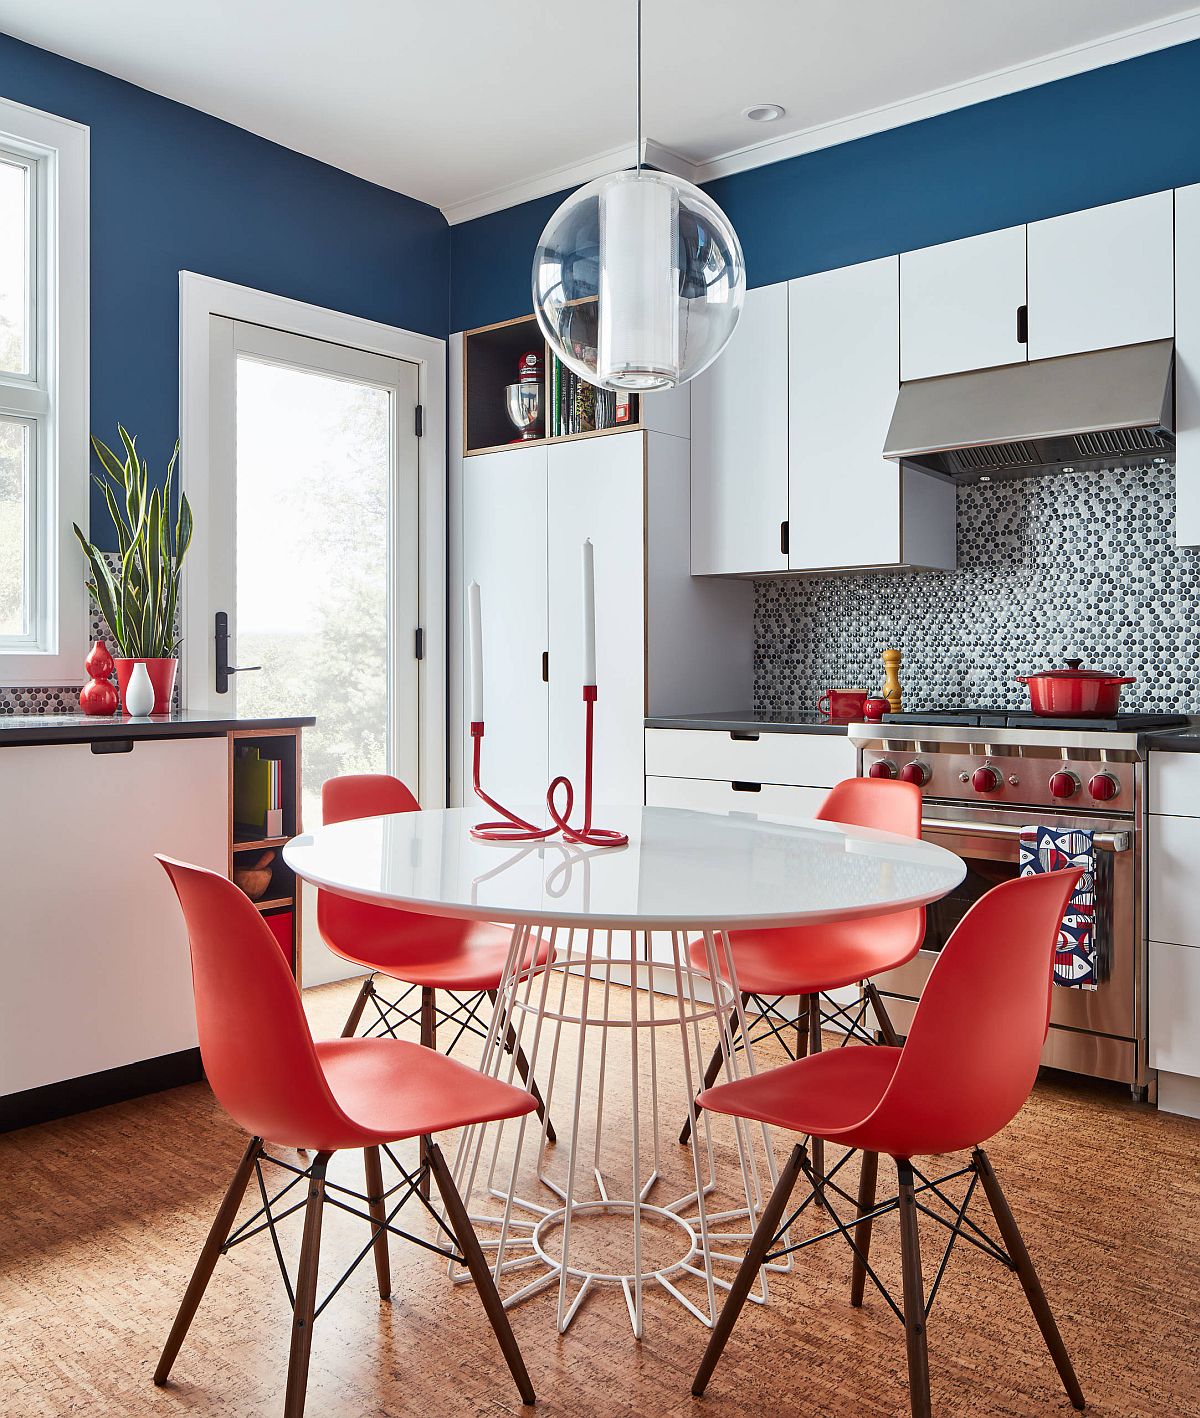 Gorgeous-eat-in-kitchen-with-white-and-blue-color-scheme-and-snazzy-cork-floor-76851